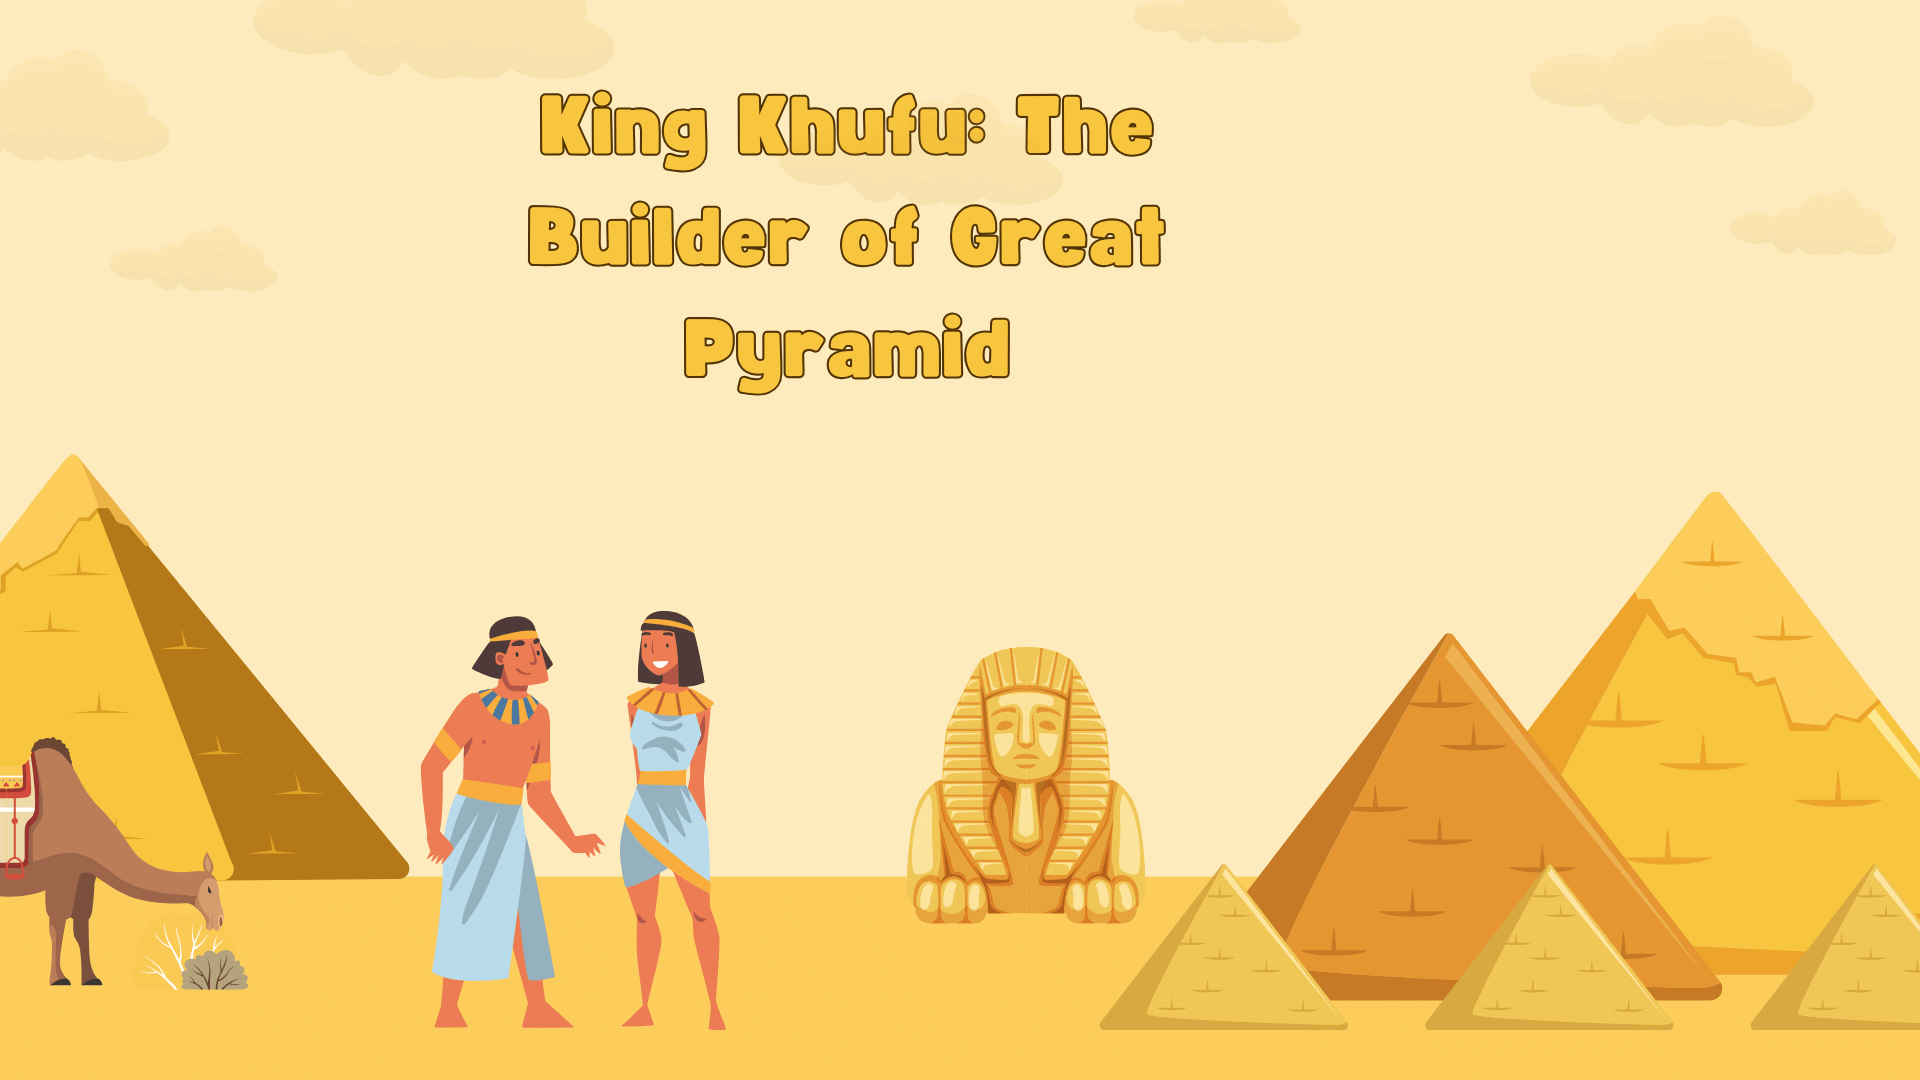 King Khufu: The Builder of Great Pyramid